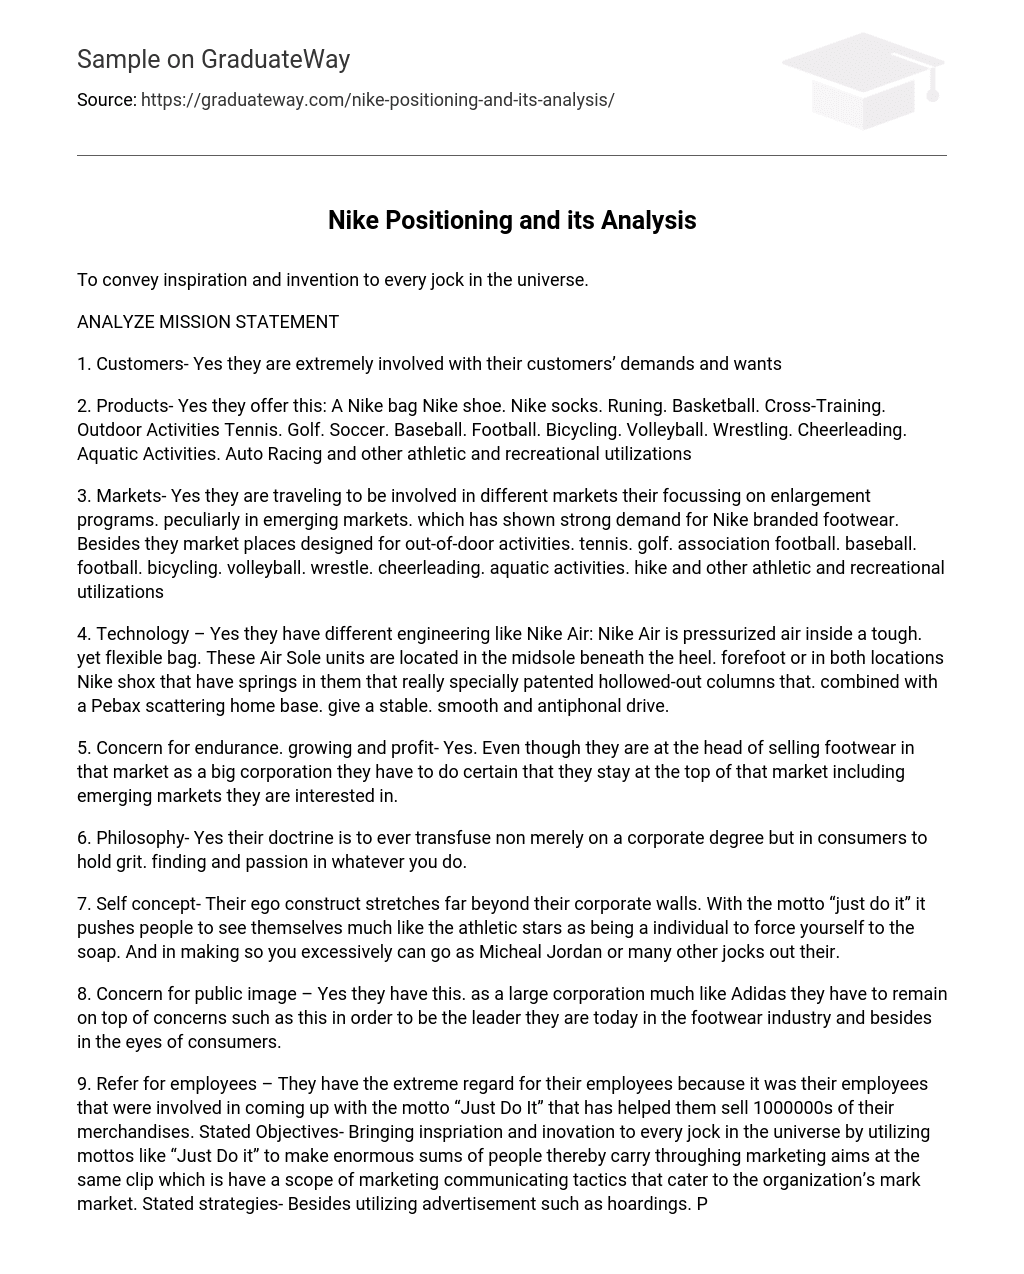 Nike Positioning and its Analysis